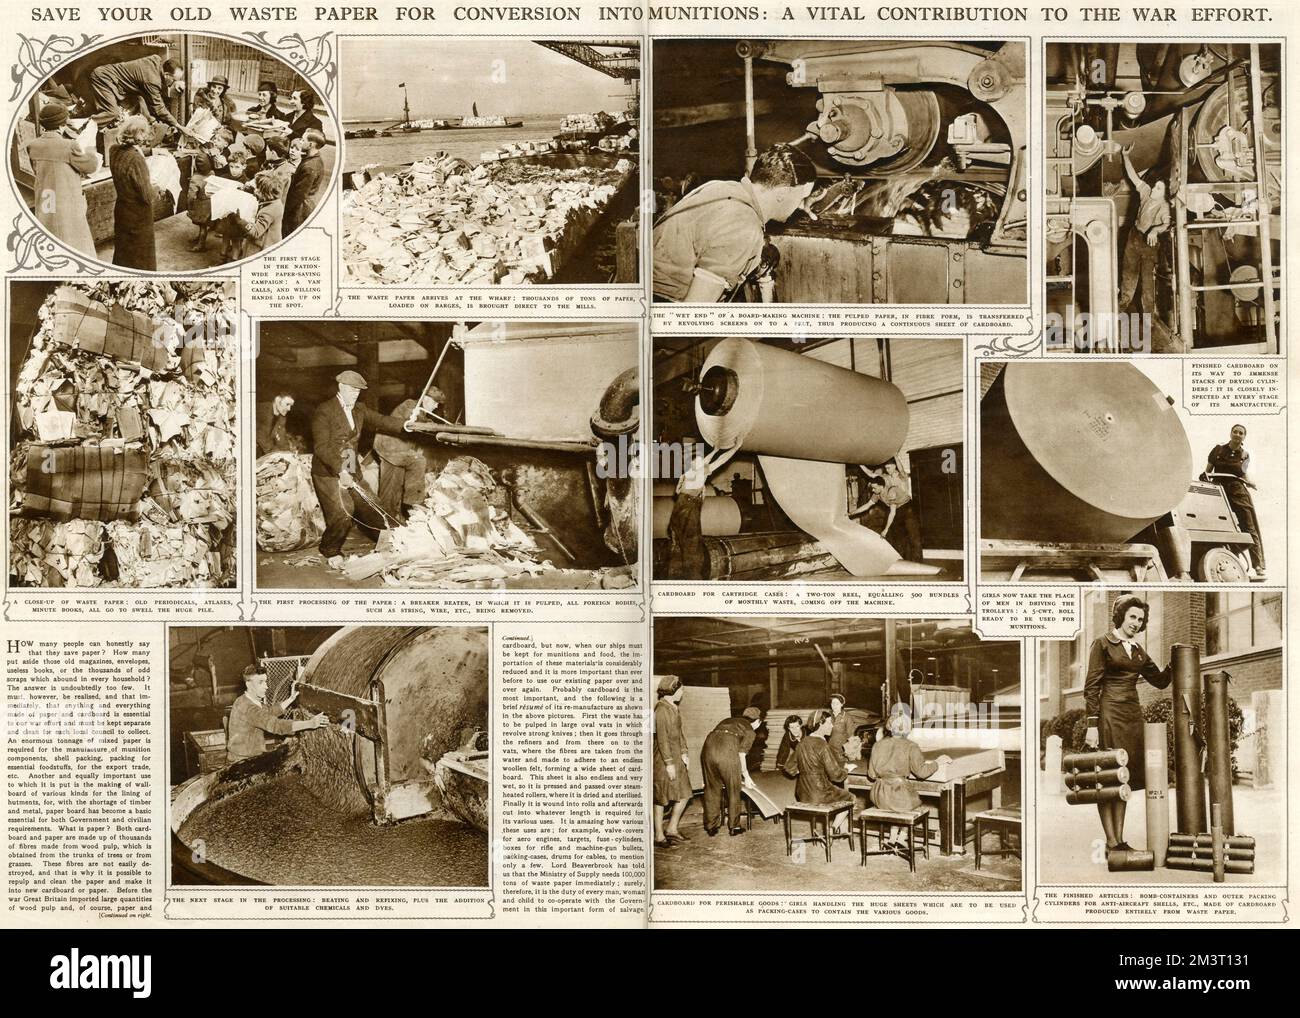 Save your old waste paper for conversion into munitions: a vital contribution to the war effort.  Double page spread from The Illustrated London News. Stock Photo